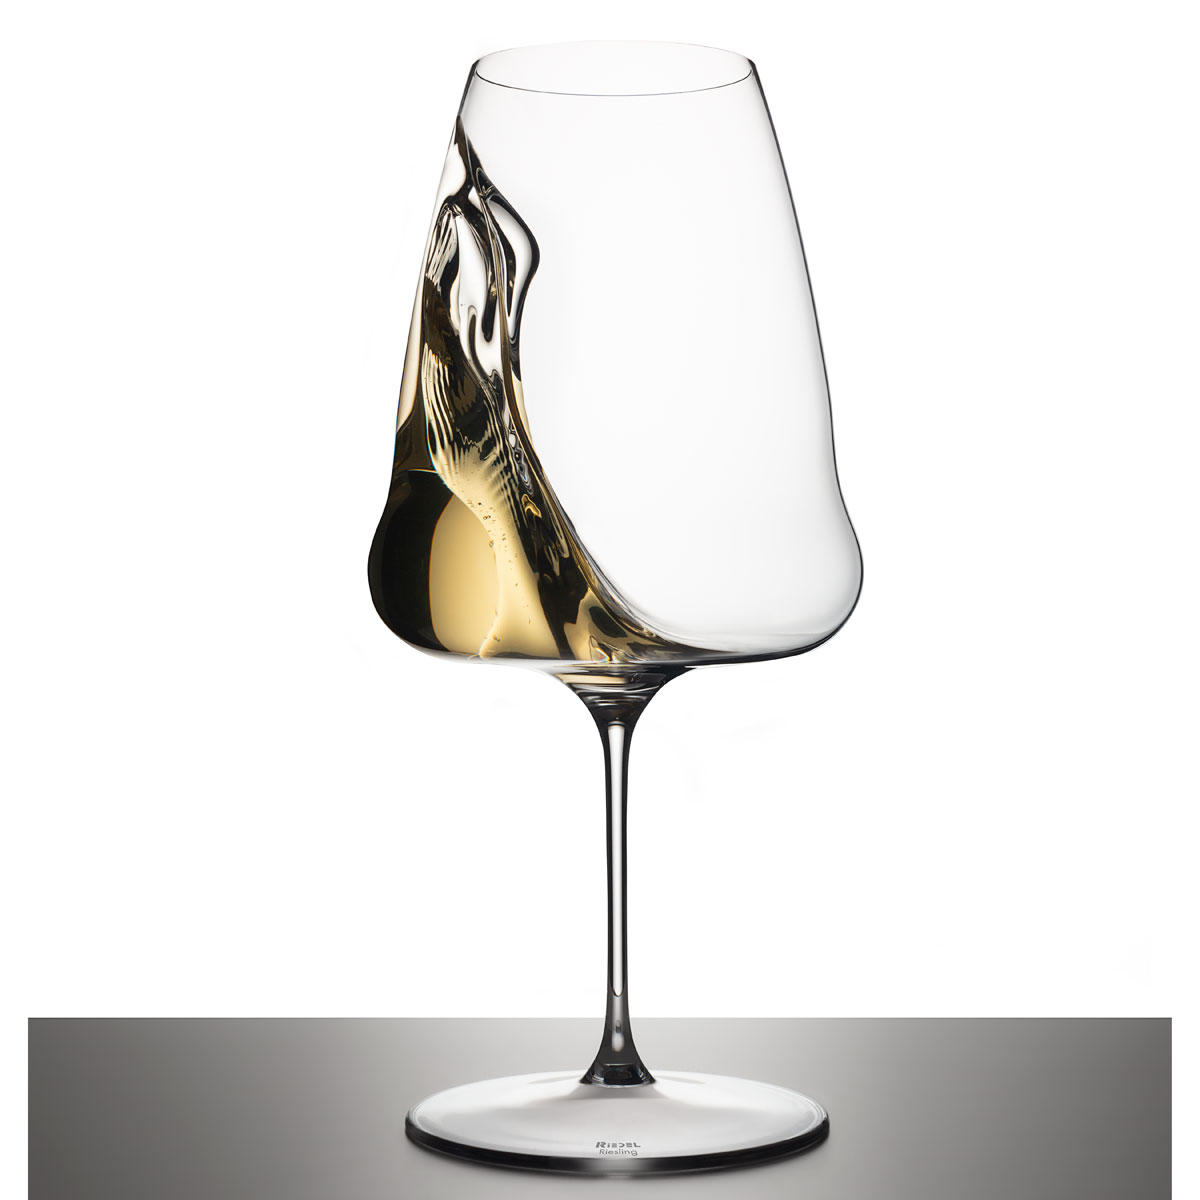 Riedel Winewings Riesling / Champagne Stemless Wine Glasses - Set